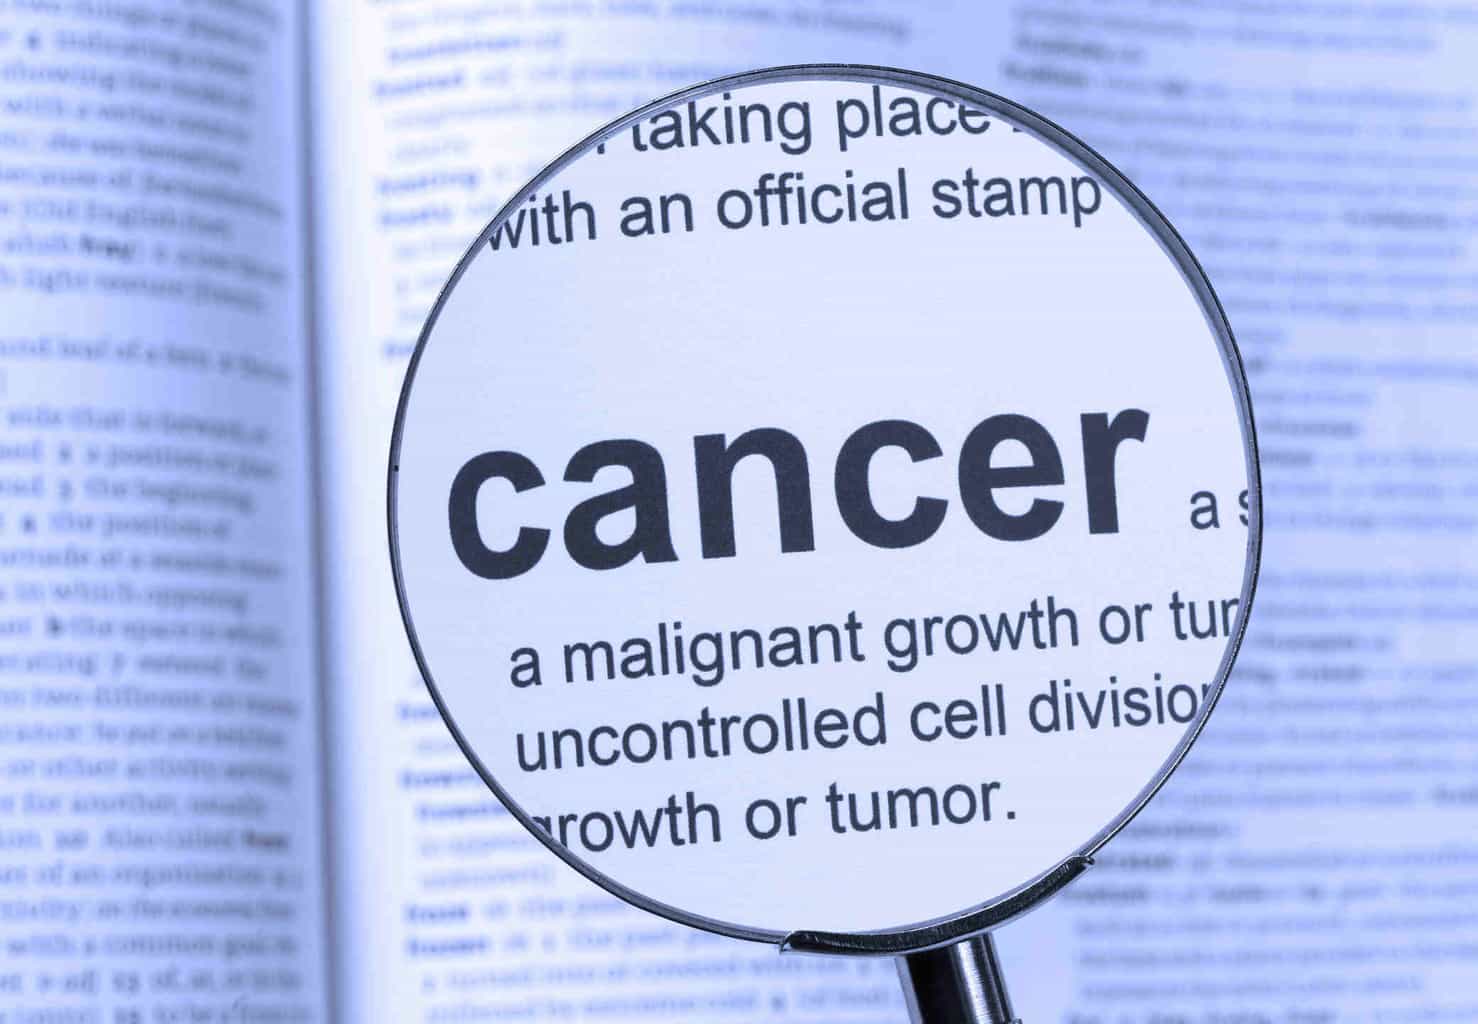 Can surgery cause cancer to spread?